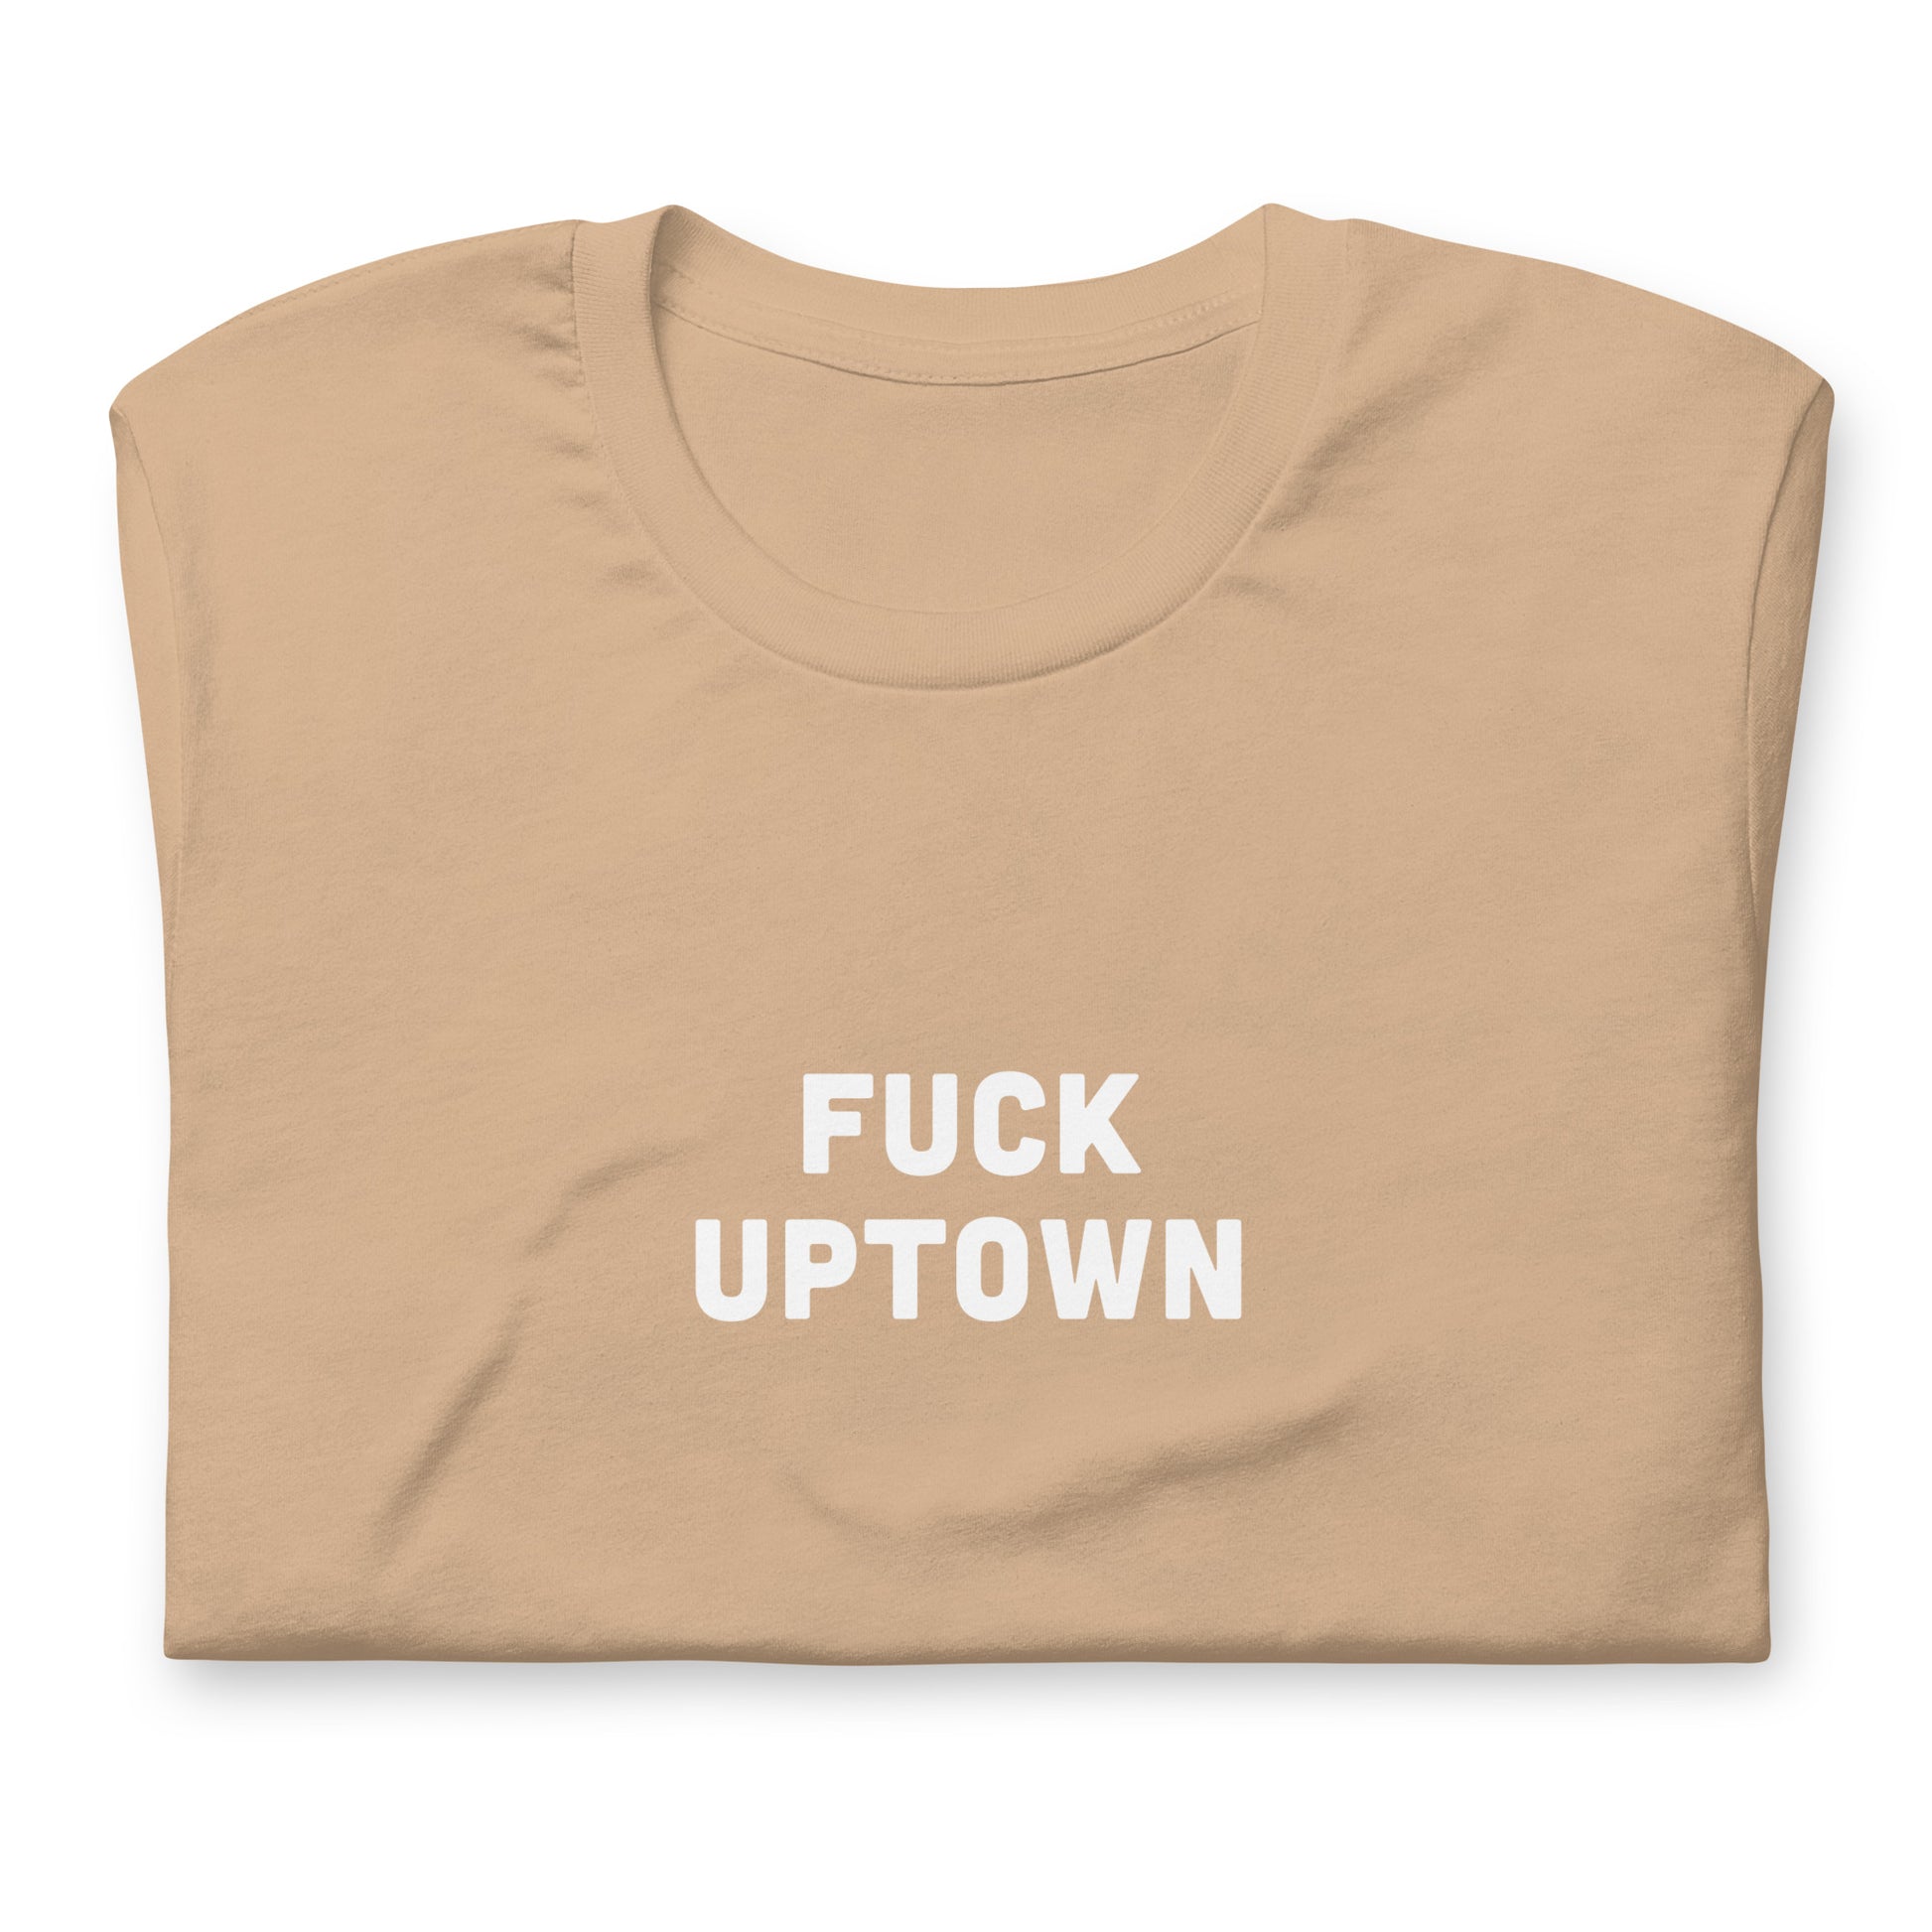 Fuck Uptown T-Shirt Size XL Color Forest